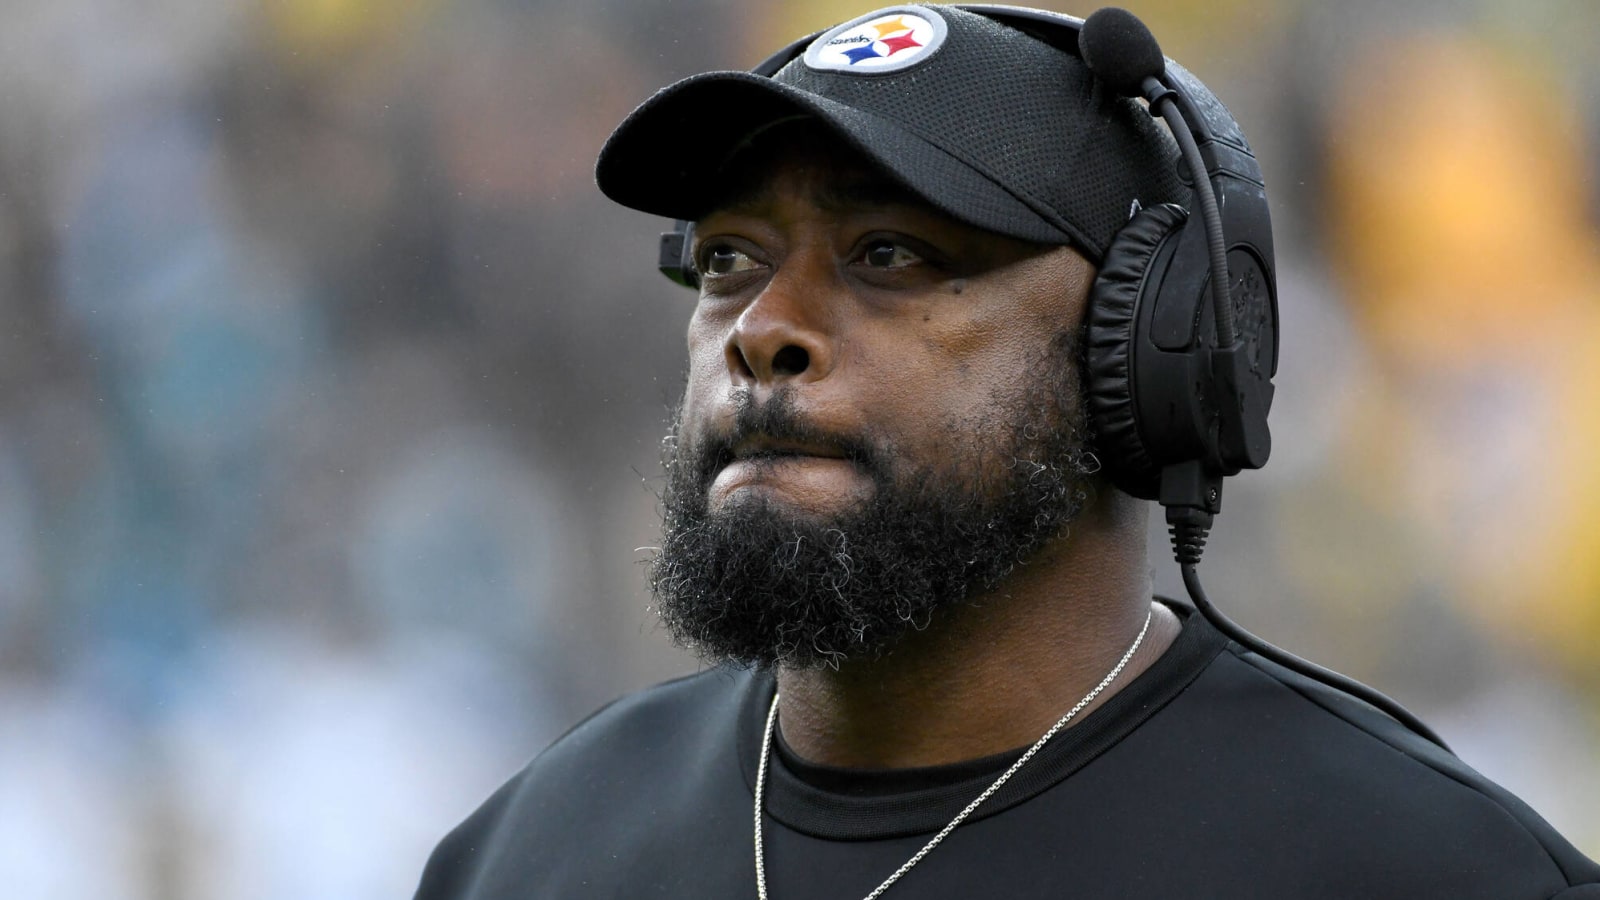 Steelers' Mike Tomlin Likely To Get Fired Without A Playoff Win In Next 2 Seasons: 'I'd Say He's Gone'